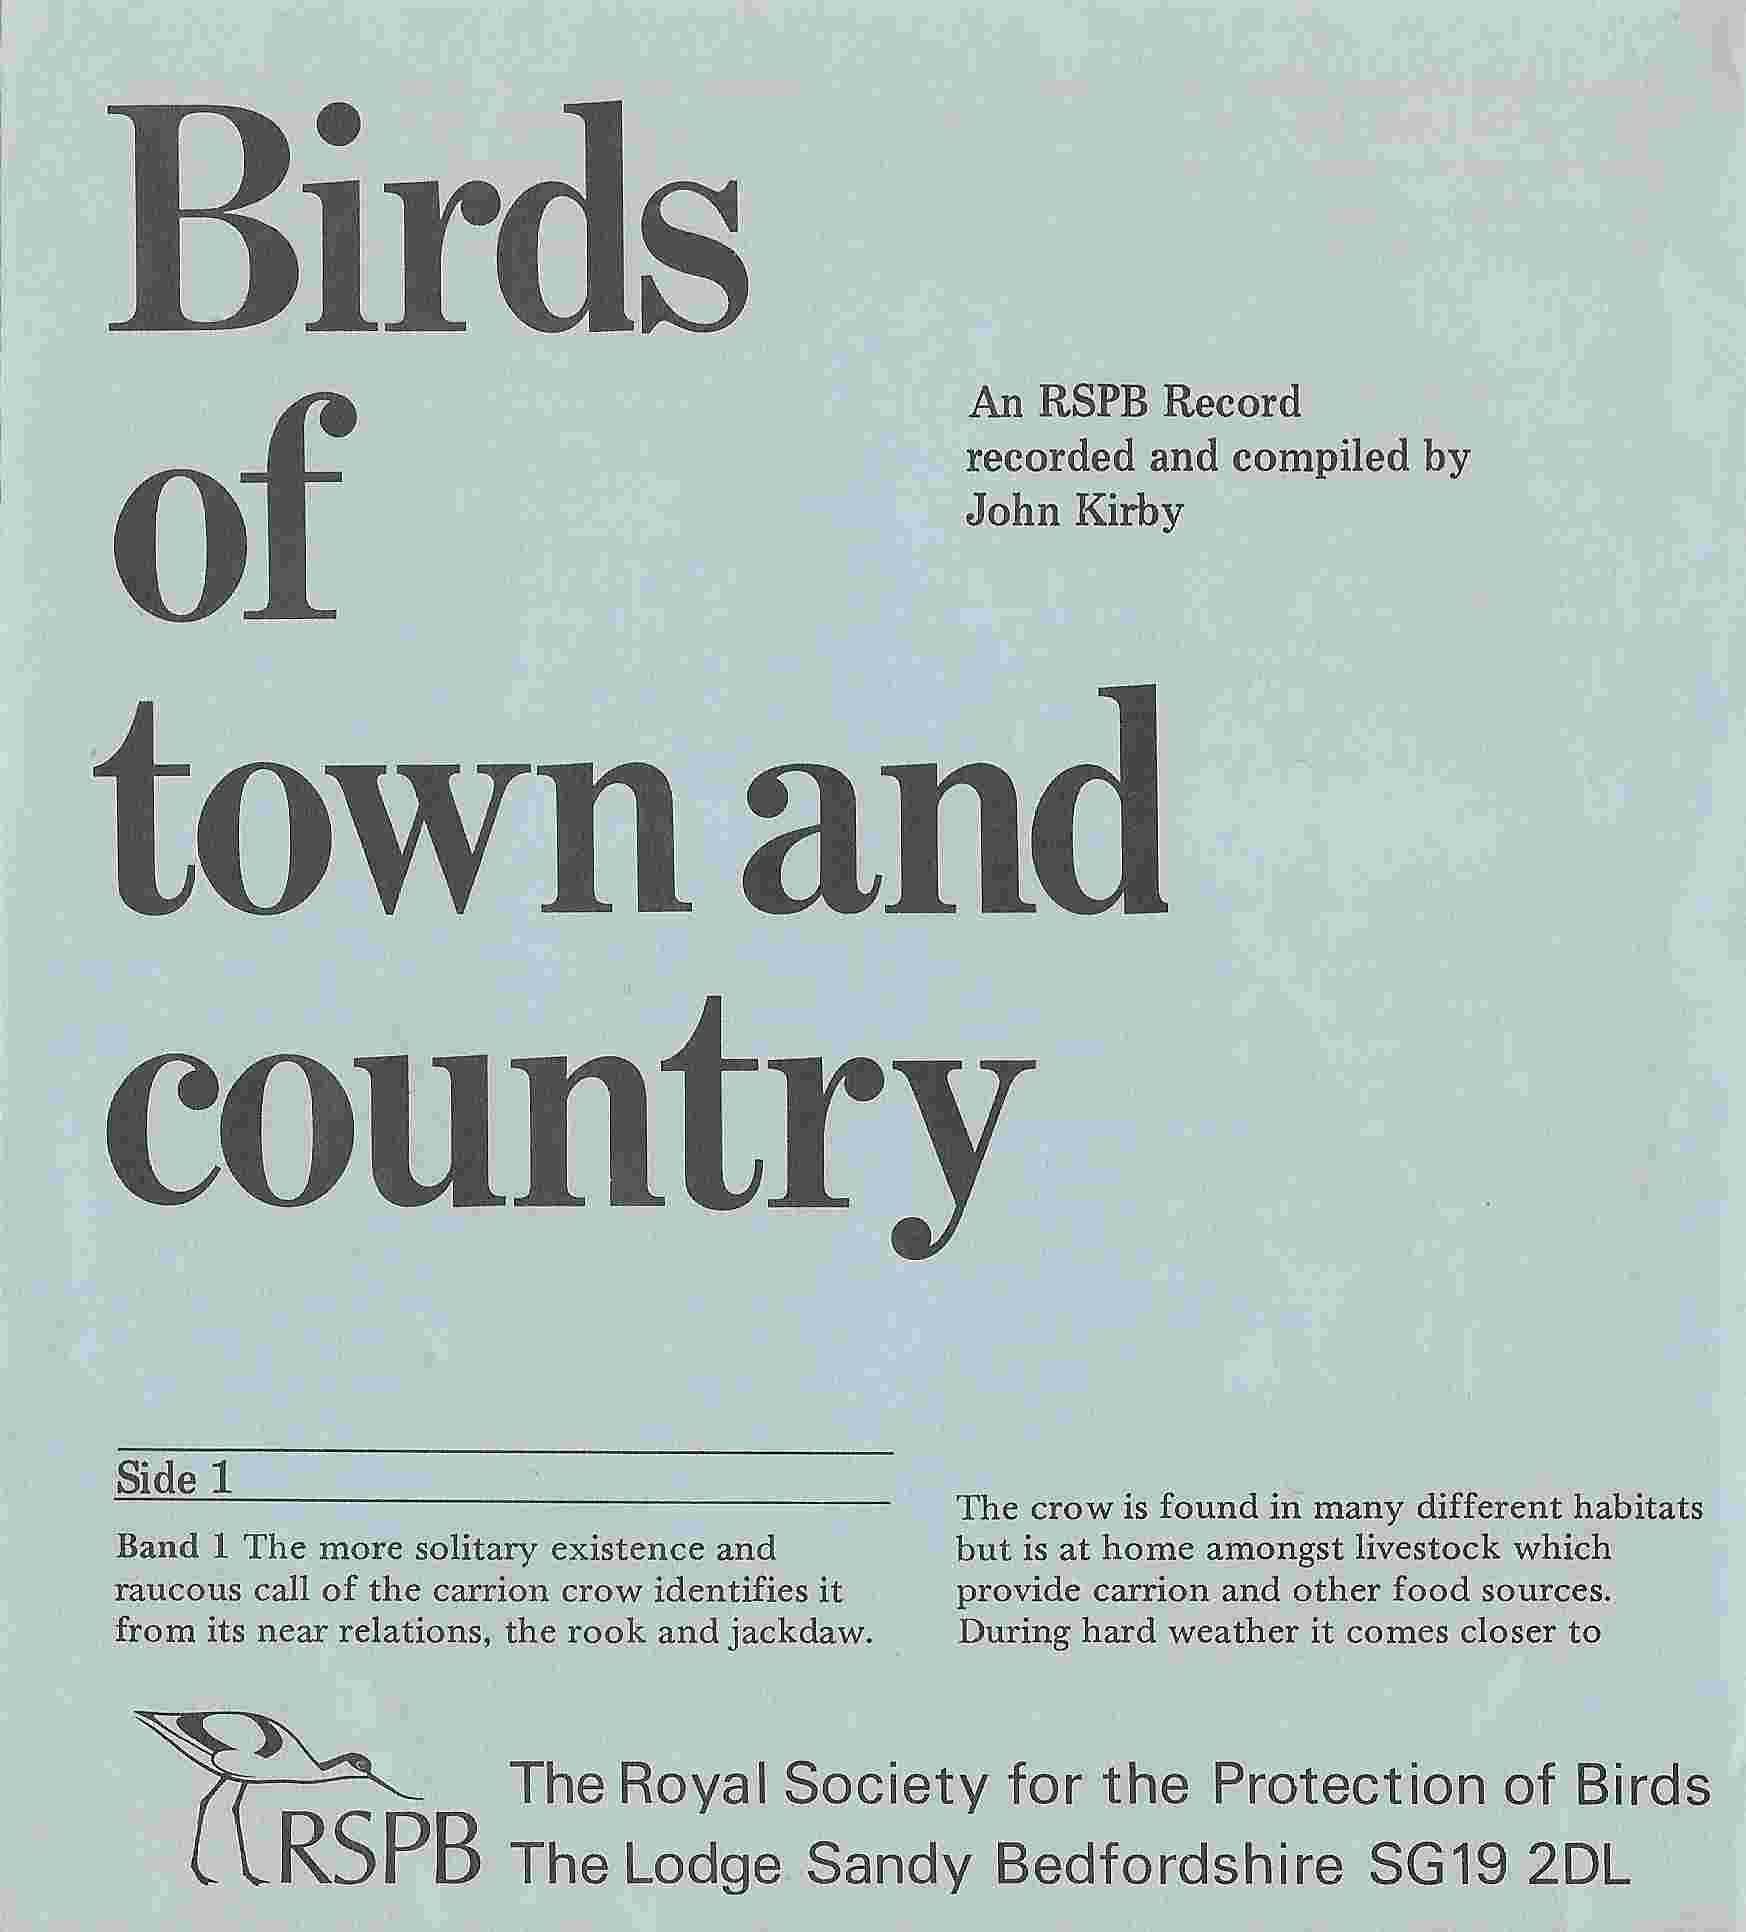 Picture of Birds of town & country by artist John Kirby from ITV, Channel 4 and Channel 5 singles library